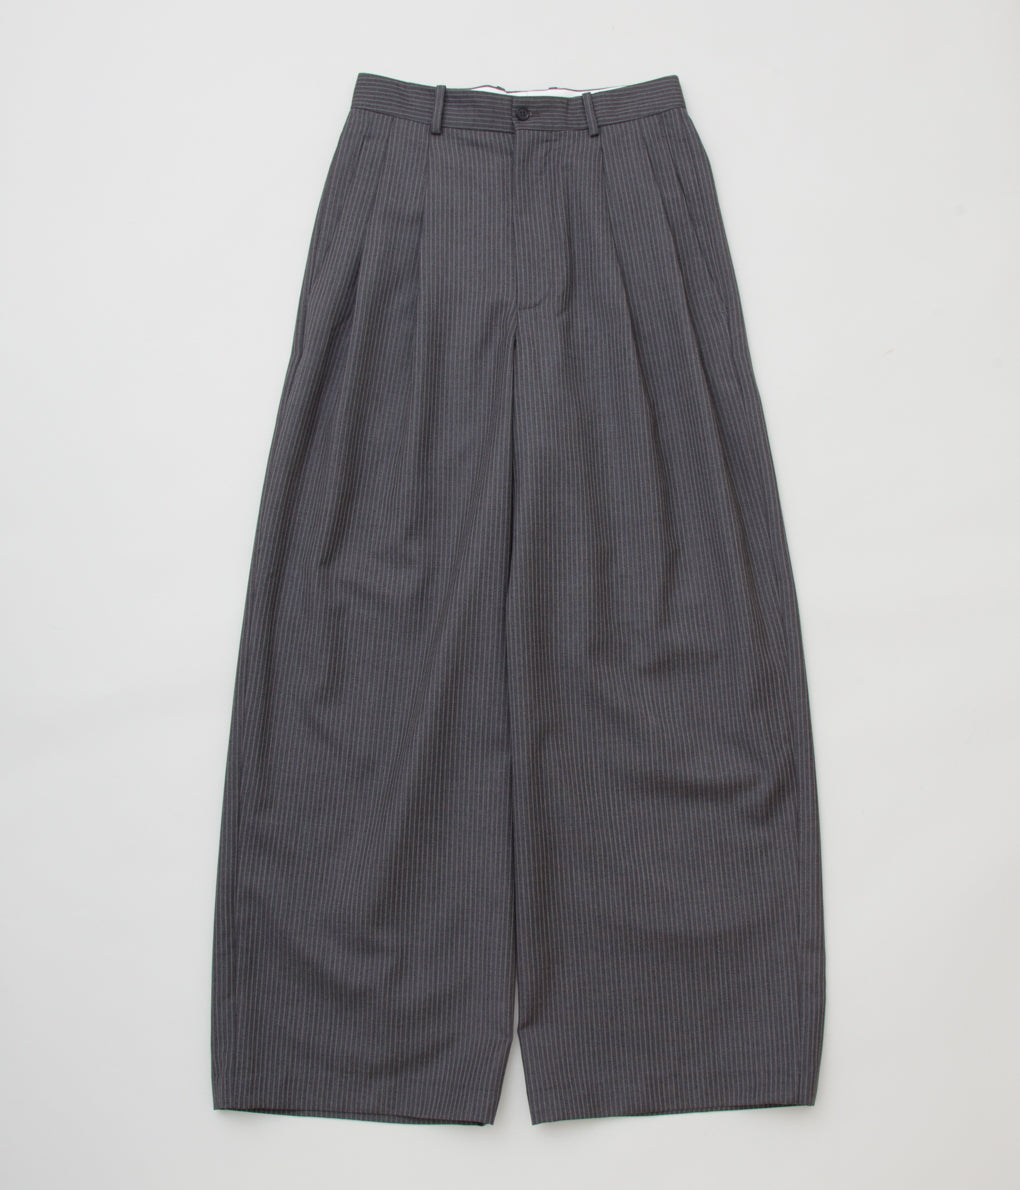 HED MAYNER "ELONGATED TROUSERS"(GREY CHALKSTRIPES)